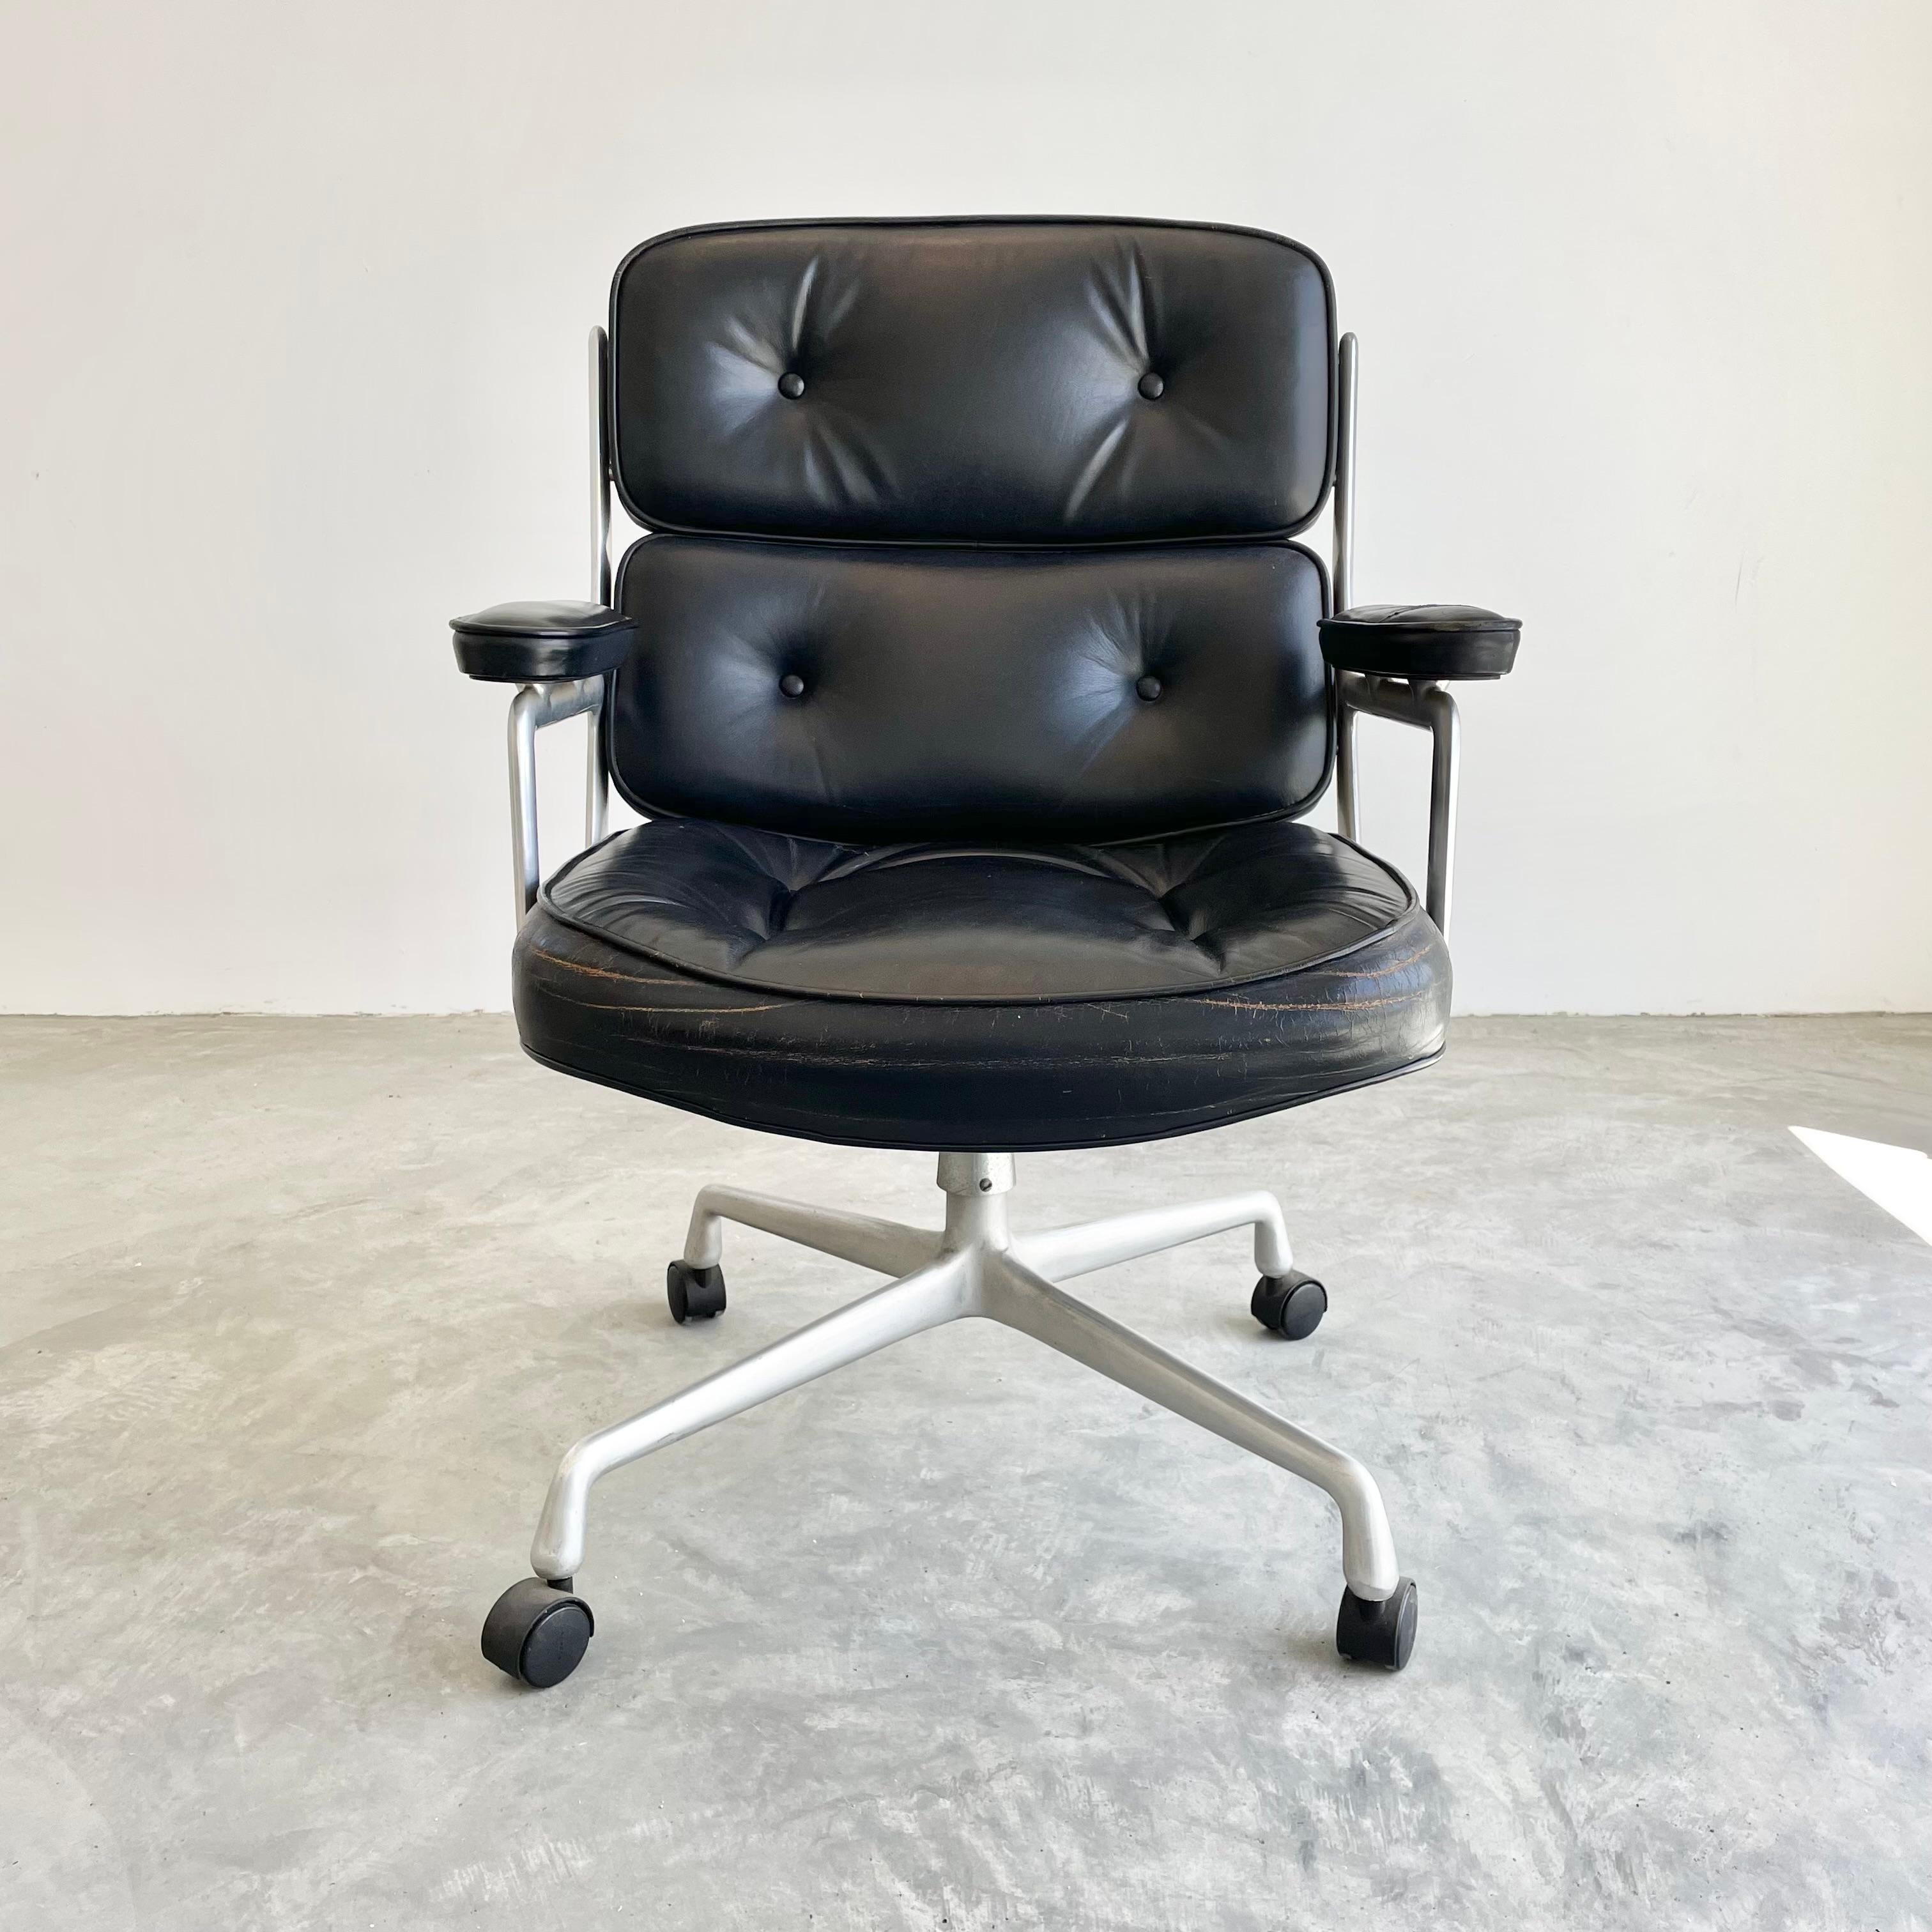 Classic Eames Time Life swivel chair in black leather for Herman Miller. Great color and patina to aluminum frame. Original black leather with some wear as shown. Extremely comfortable and worn in. Chair swivels. Chair reclines. Height is